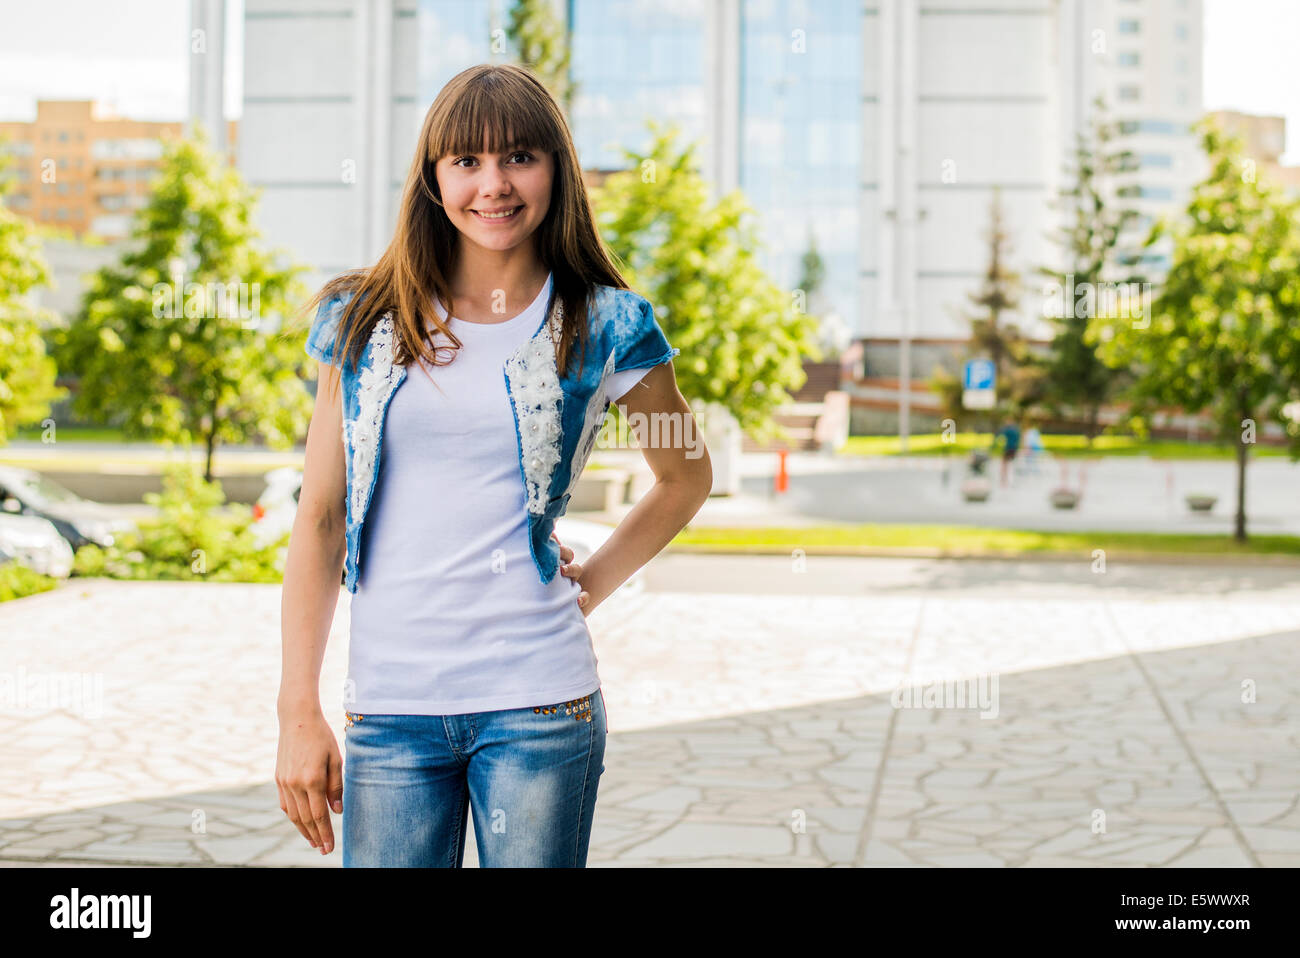 Portrait of young woman posing with hand on hip in city Stock Photo